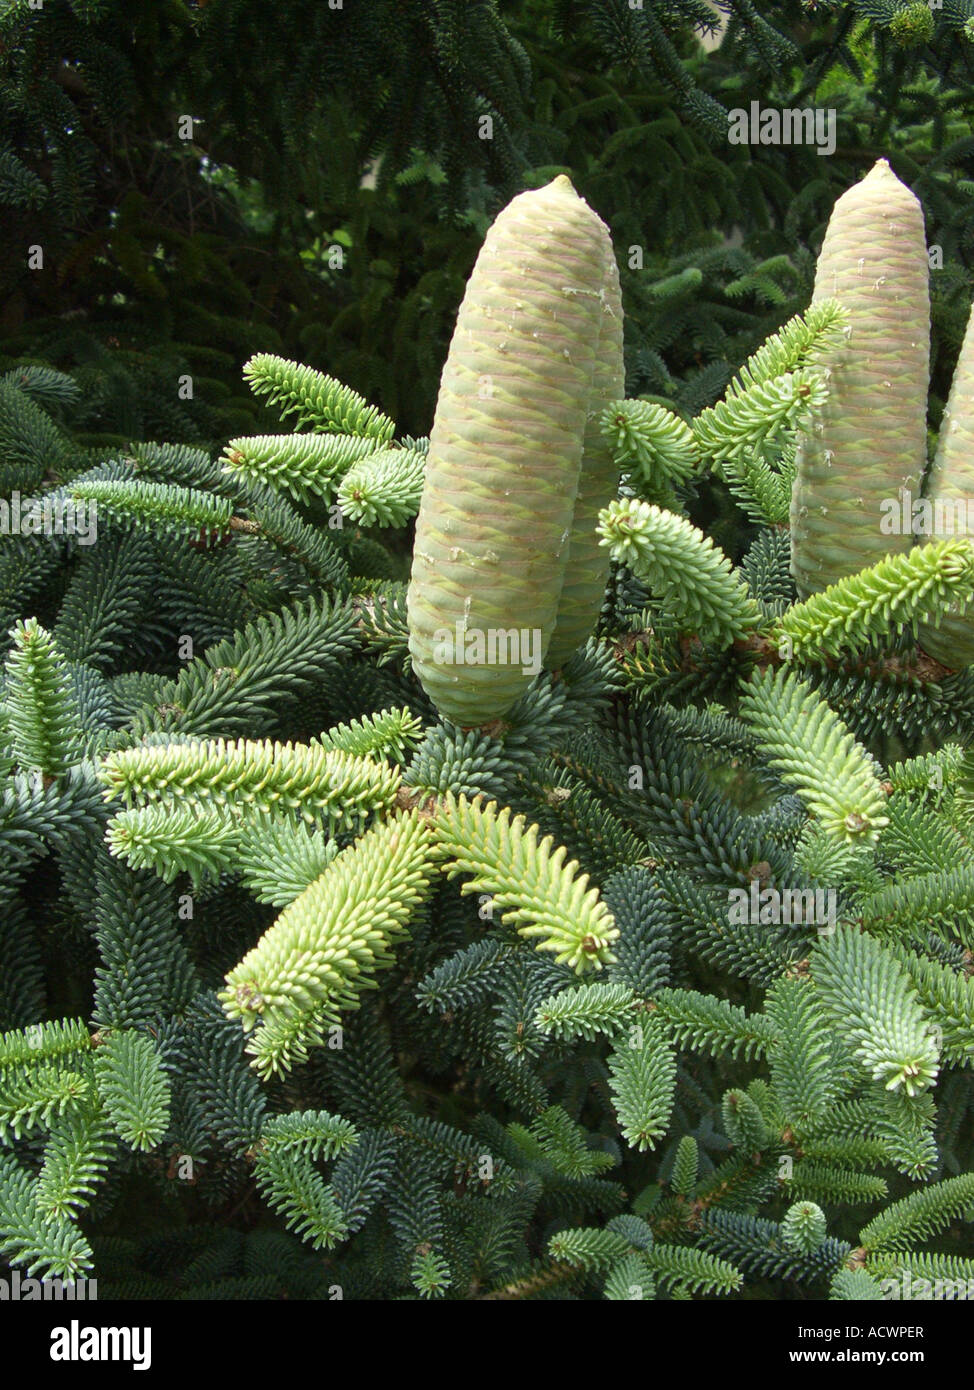 blue Spanish fir (Abies pinsapo 'Glauca', Abies pinsapo Glauca), branch with cones Stock Photo